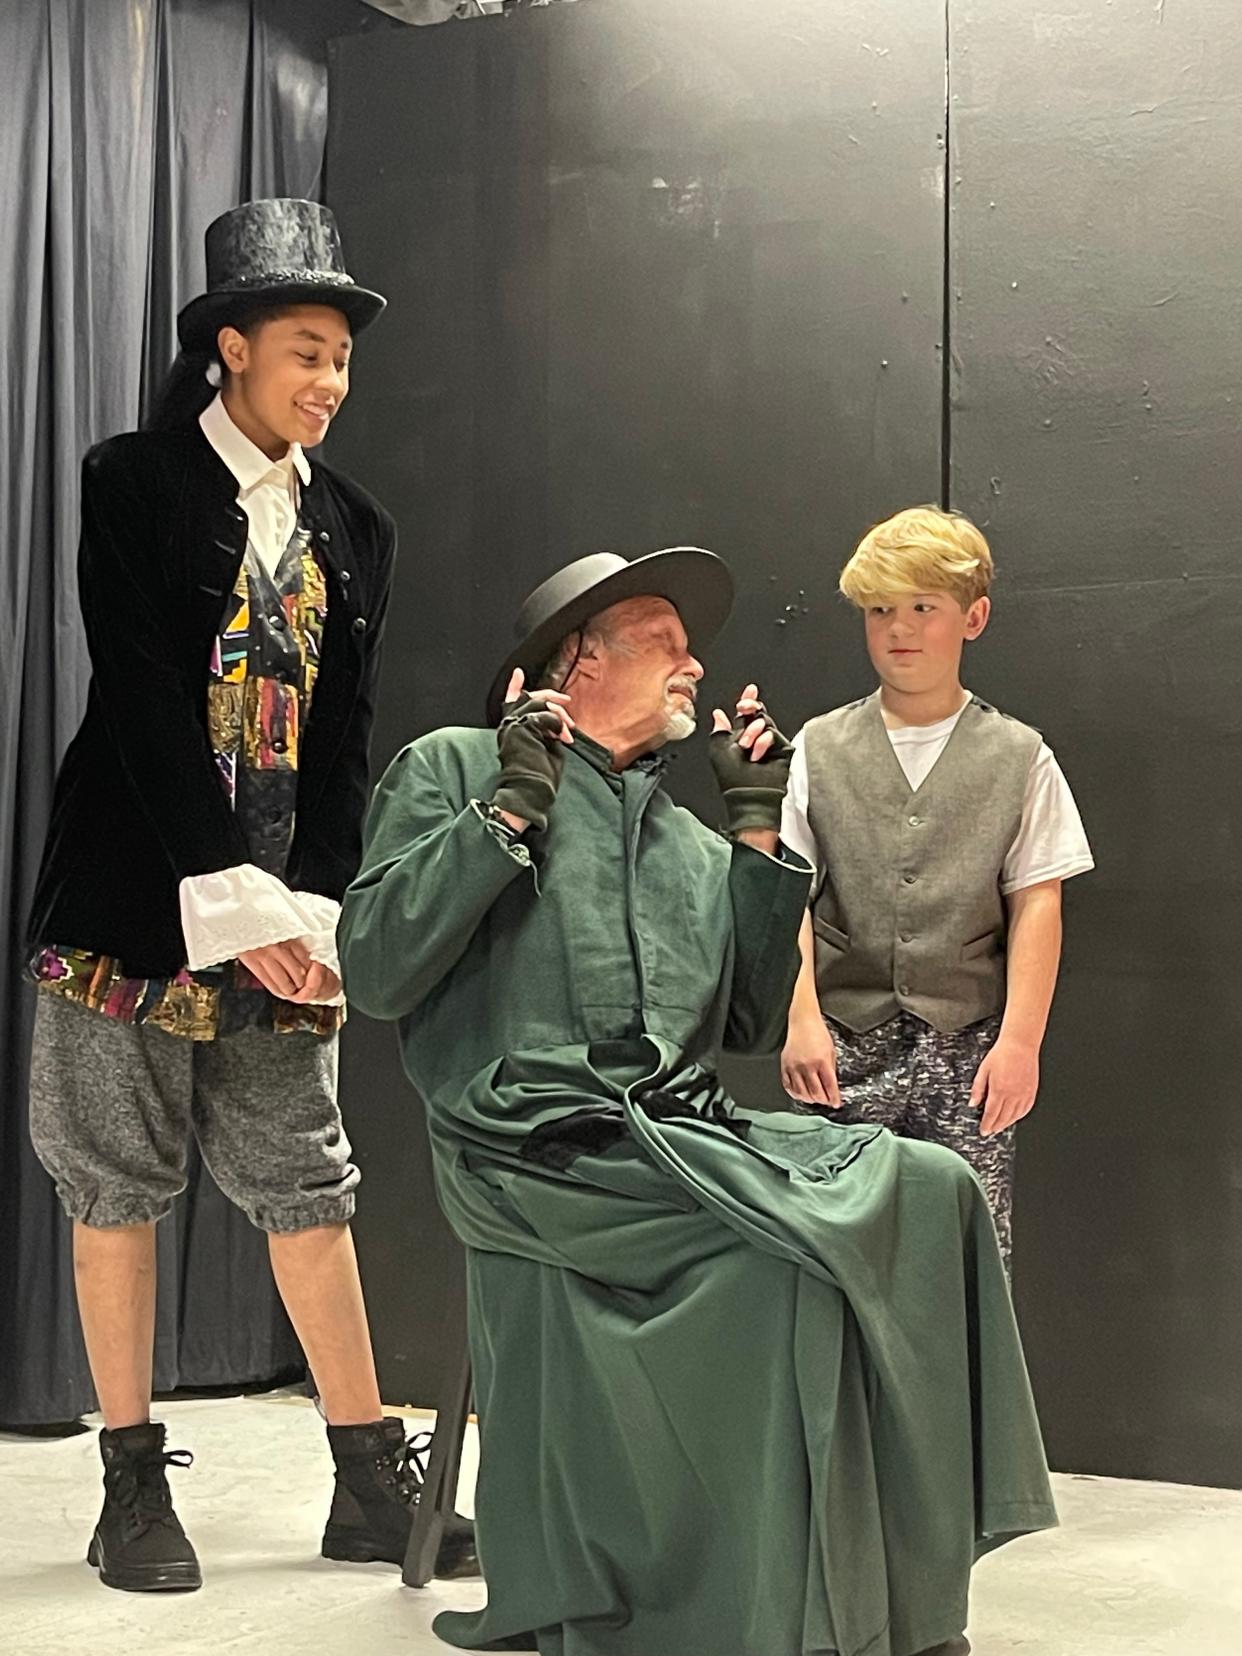 Erika Frye, left, as The Artful Dodger, Robert Richter, as Fagin, and Eli Gowan, as Oliver, rehearse a scene for Footlight Players' production of "Oliver!" that opens March 3 and continues through March 19, 2023, at the theater in Michigan City.